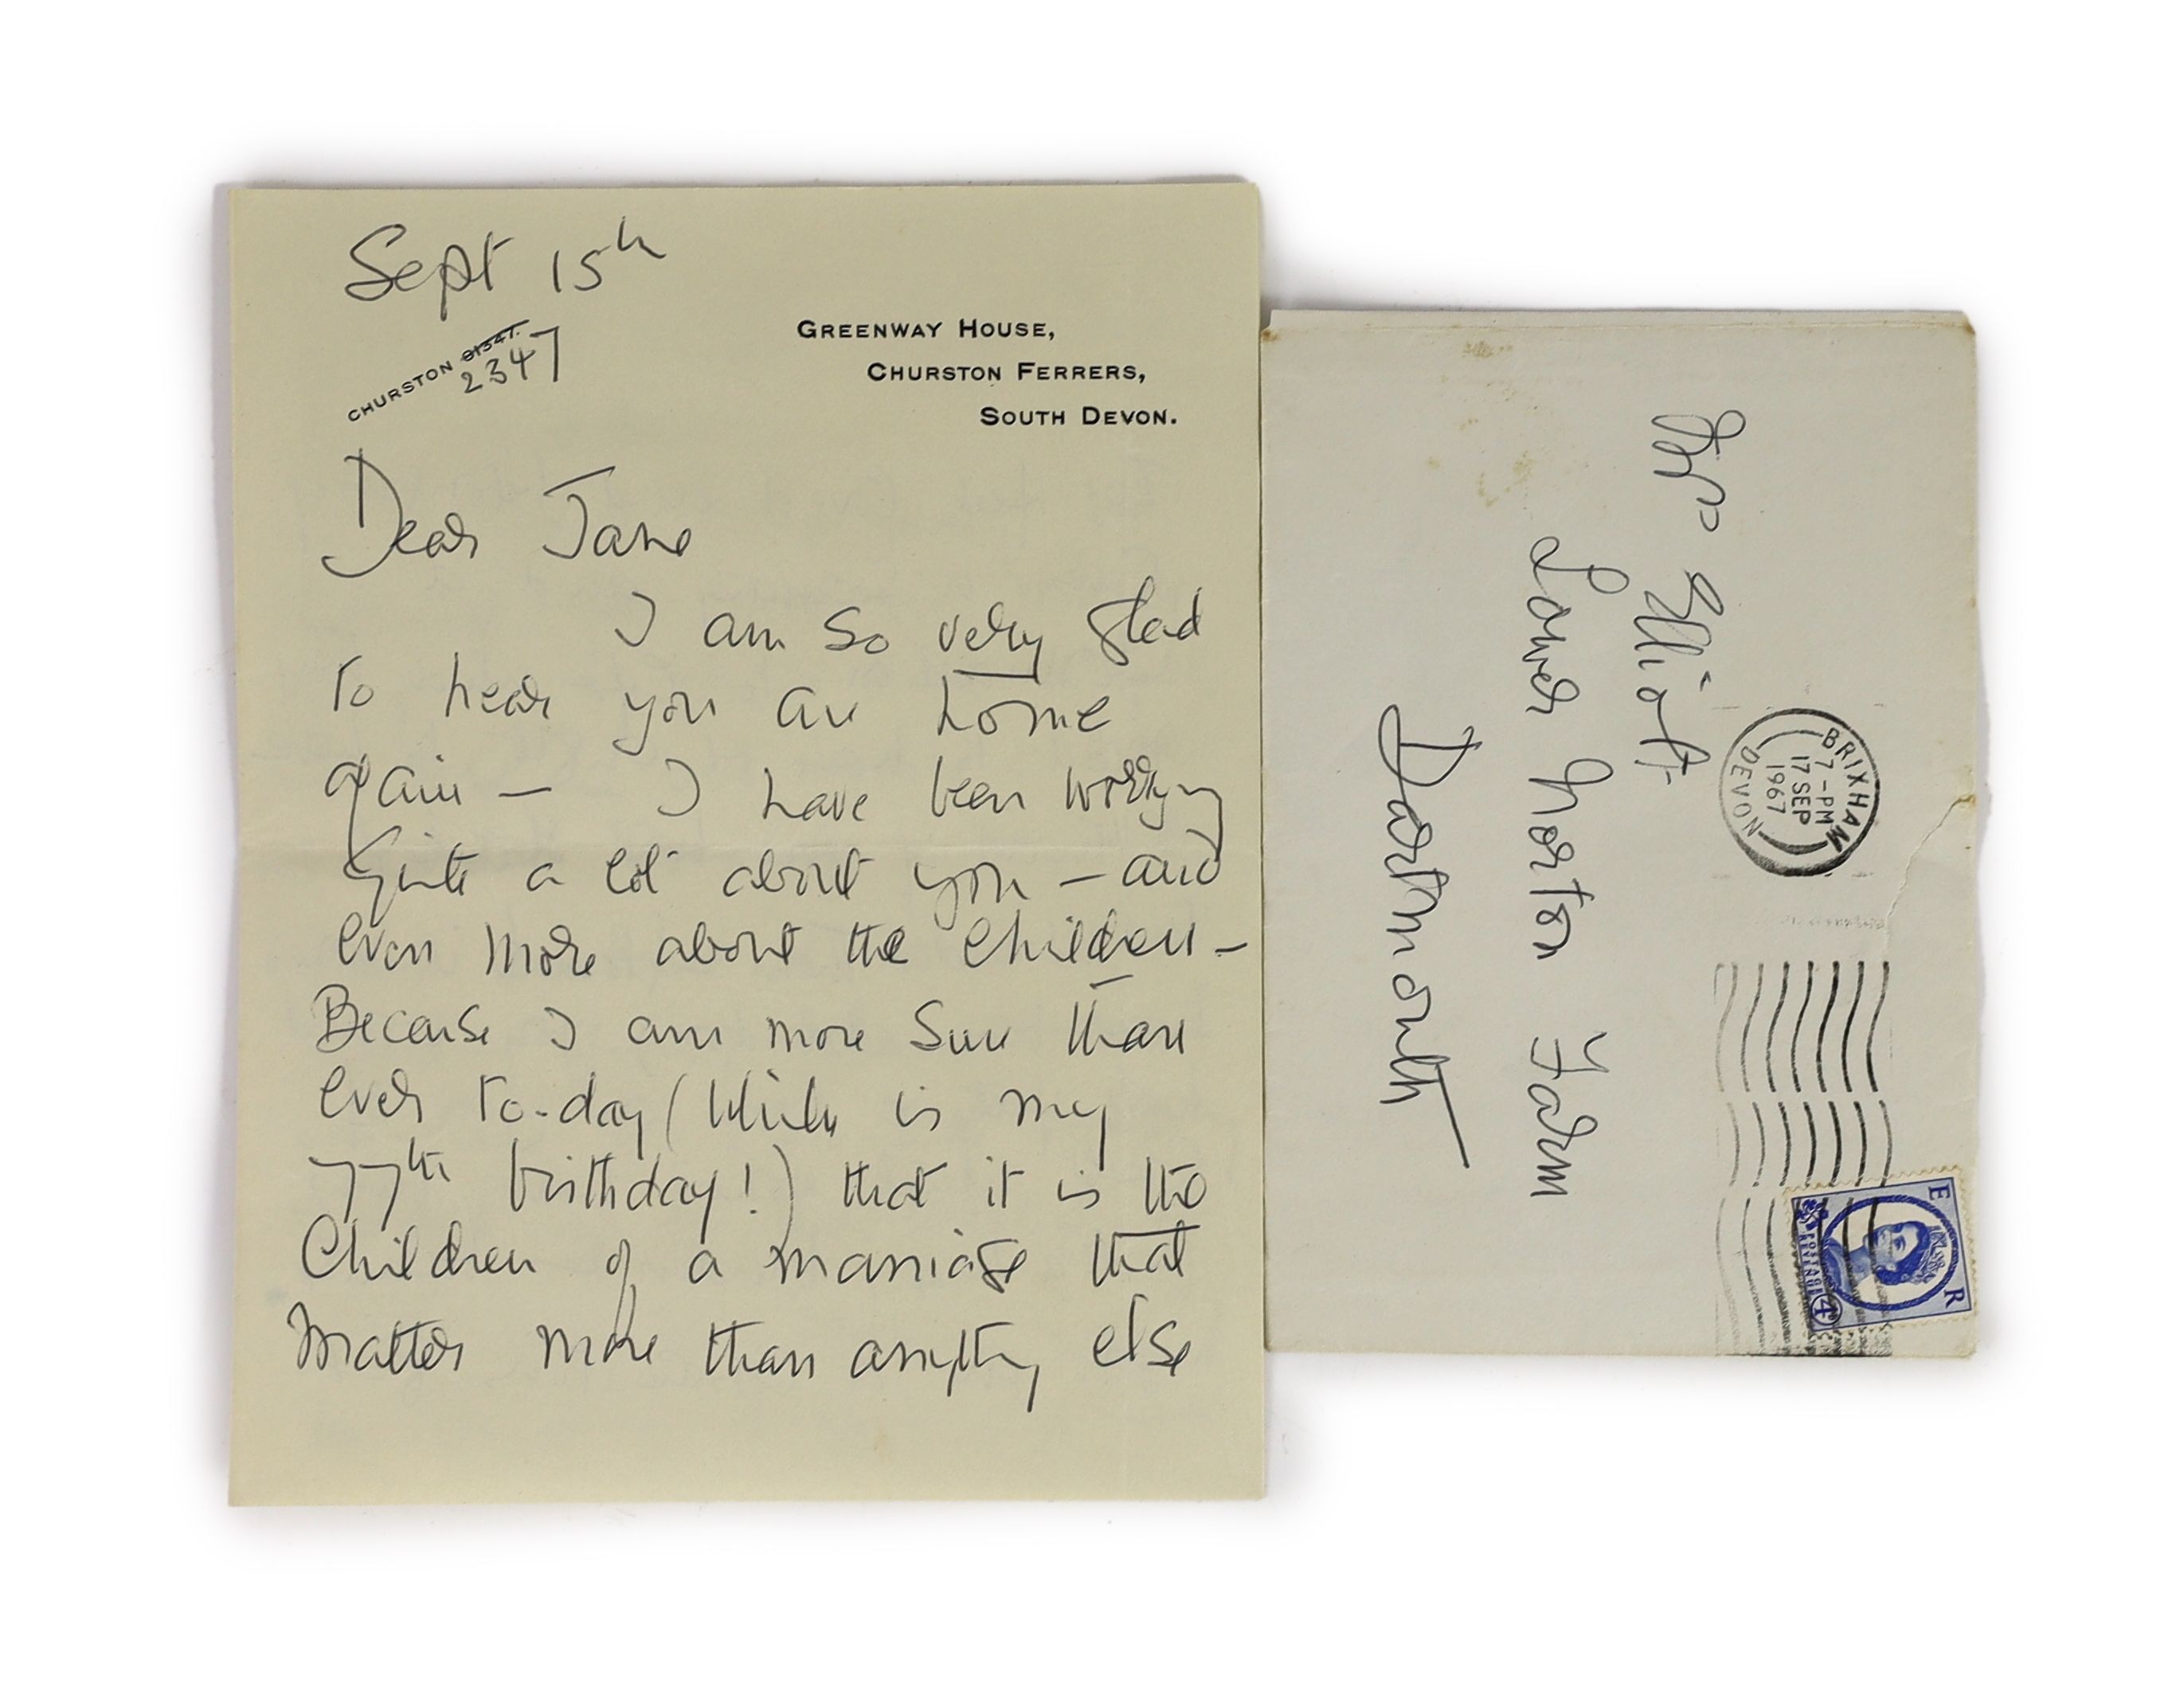 A manuscript letter from Agatha Christie to Mrs Elliot on Greenway notepaper